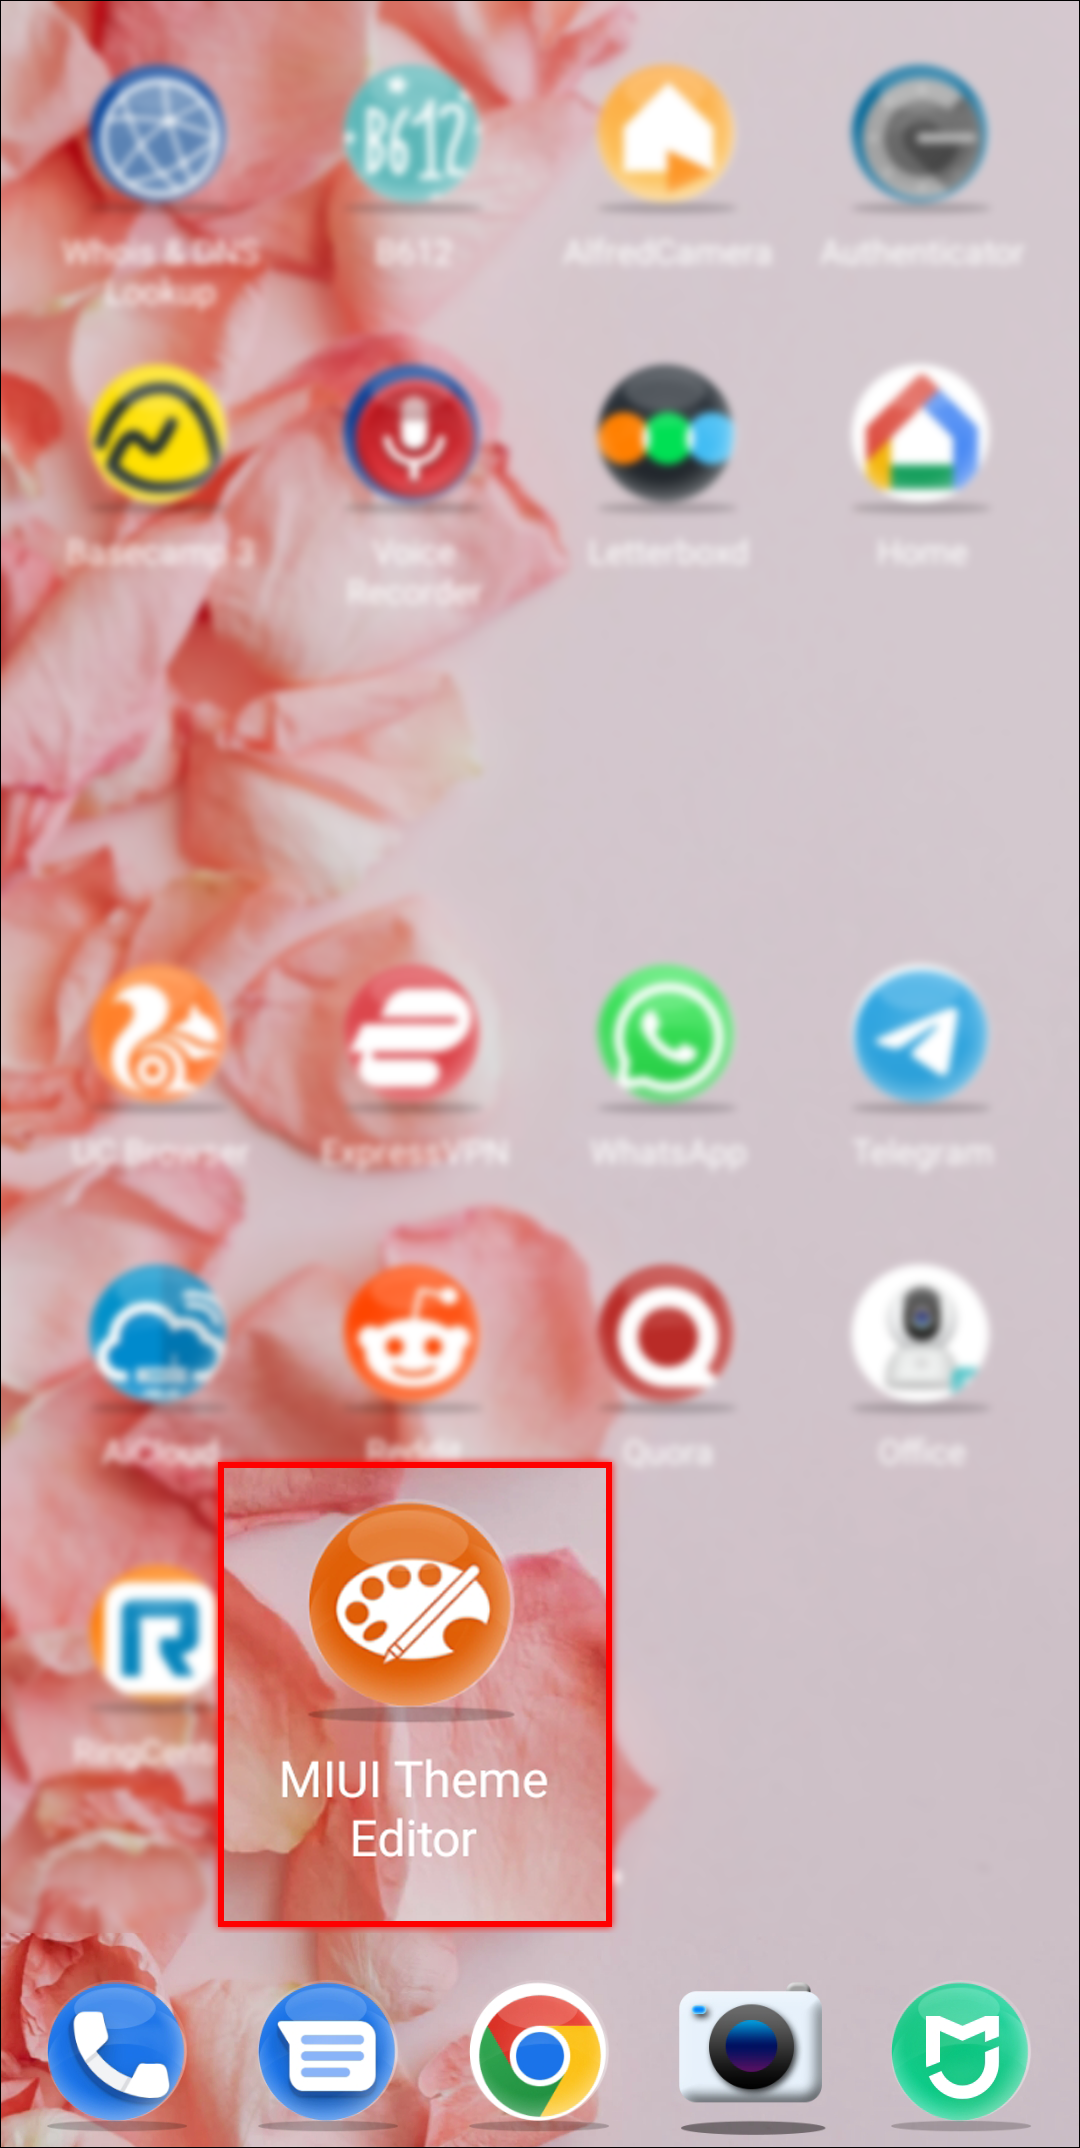 How To Change Themes on a MIUI Phone